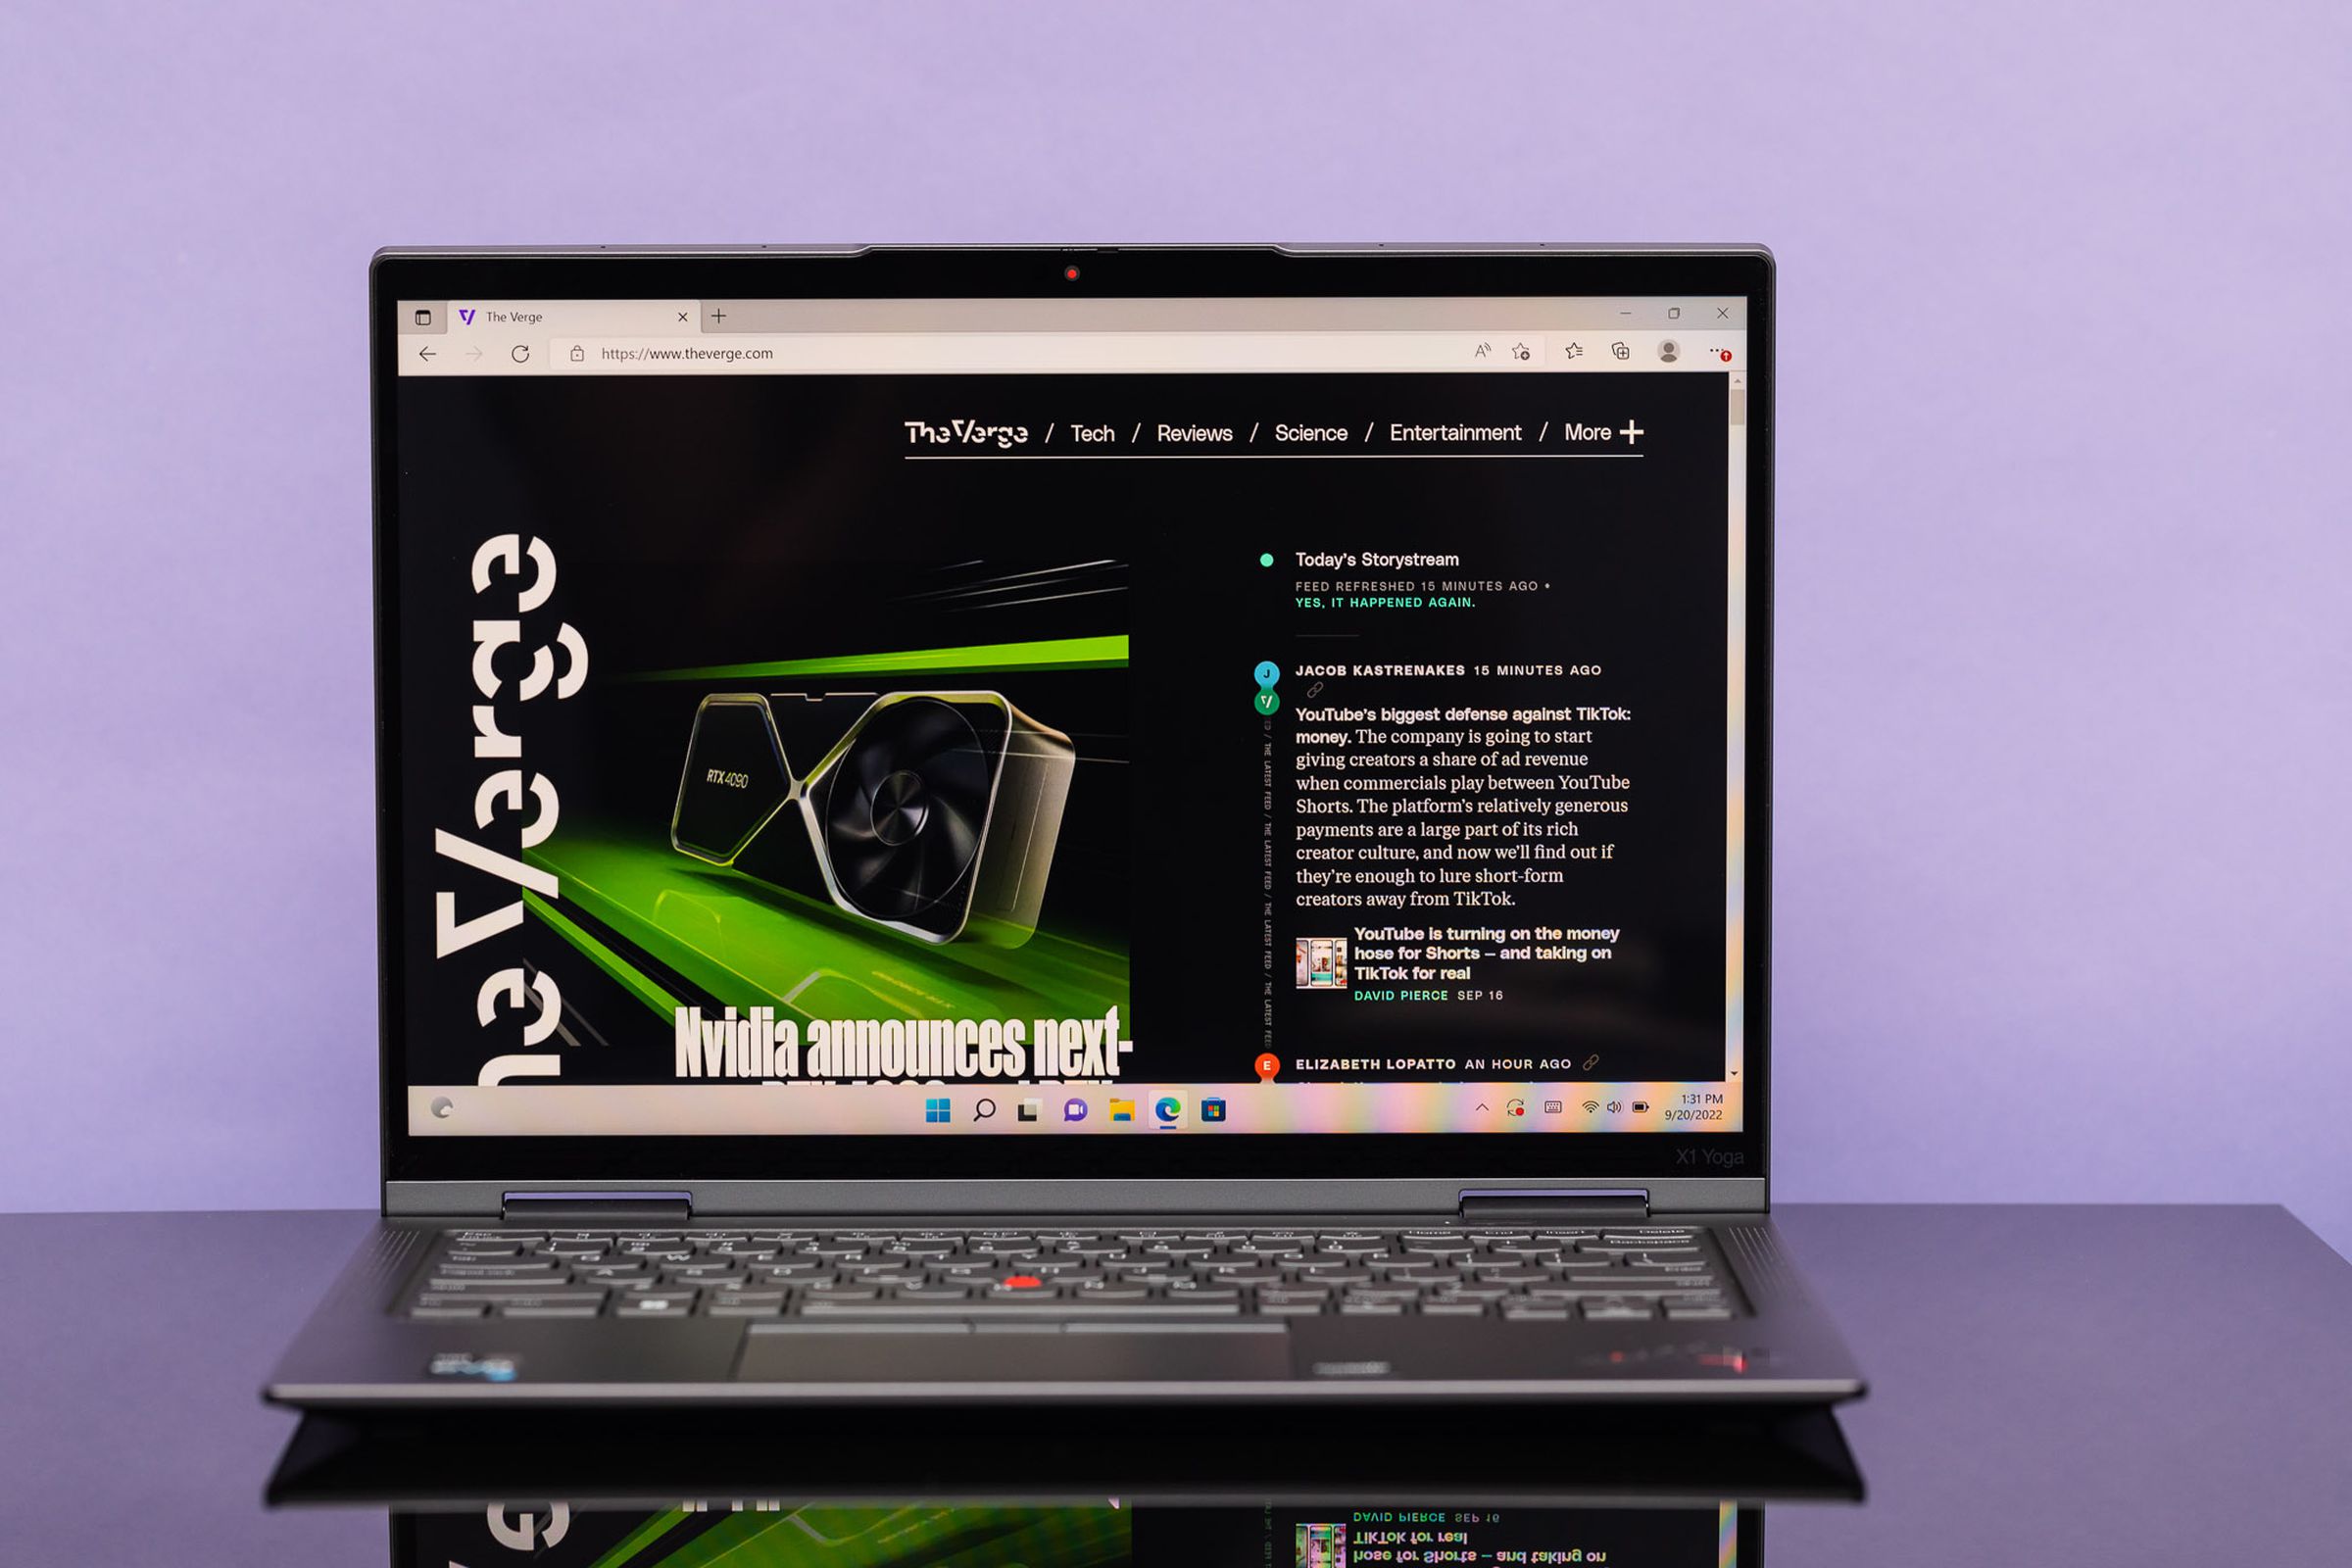 The ThinkPad X1 YOga Gen 7 open, displaying The Verge homepage.